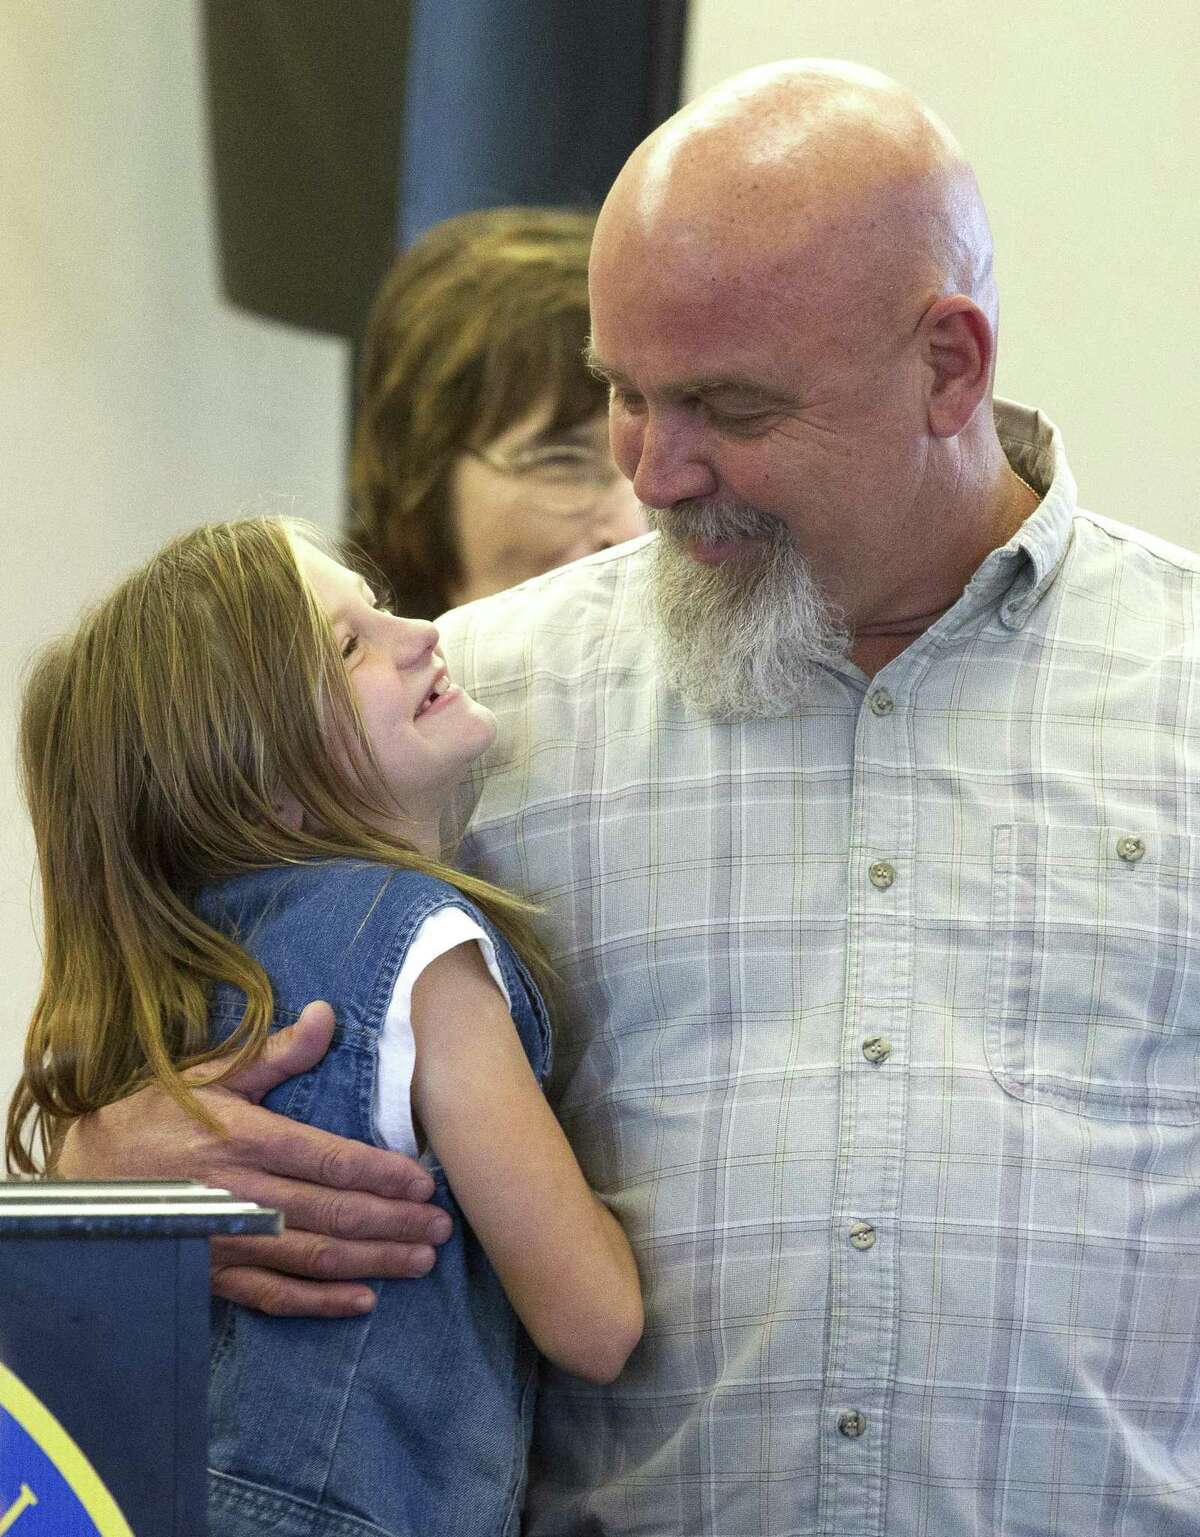 Chelsea Schmidt, a fifth grader at William Lloyd Meador Elementary School, looks up at her father Keith, whom she wrote her 'My American Hero' essay about, during a Lake Conroe Area Republican Women club meeting at April Sound Country Club Thursday, March 2, 2017, in Montgomery.